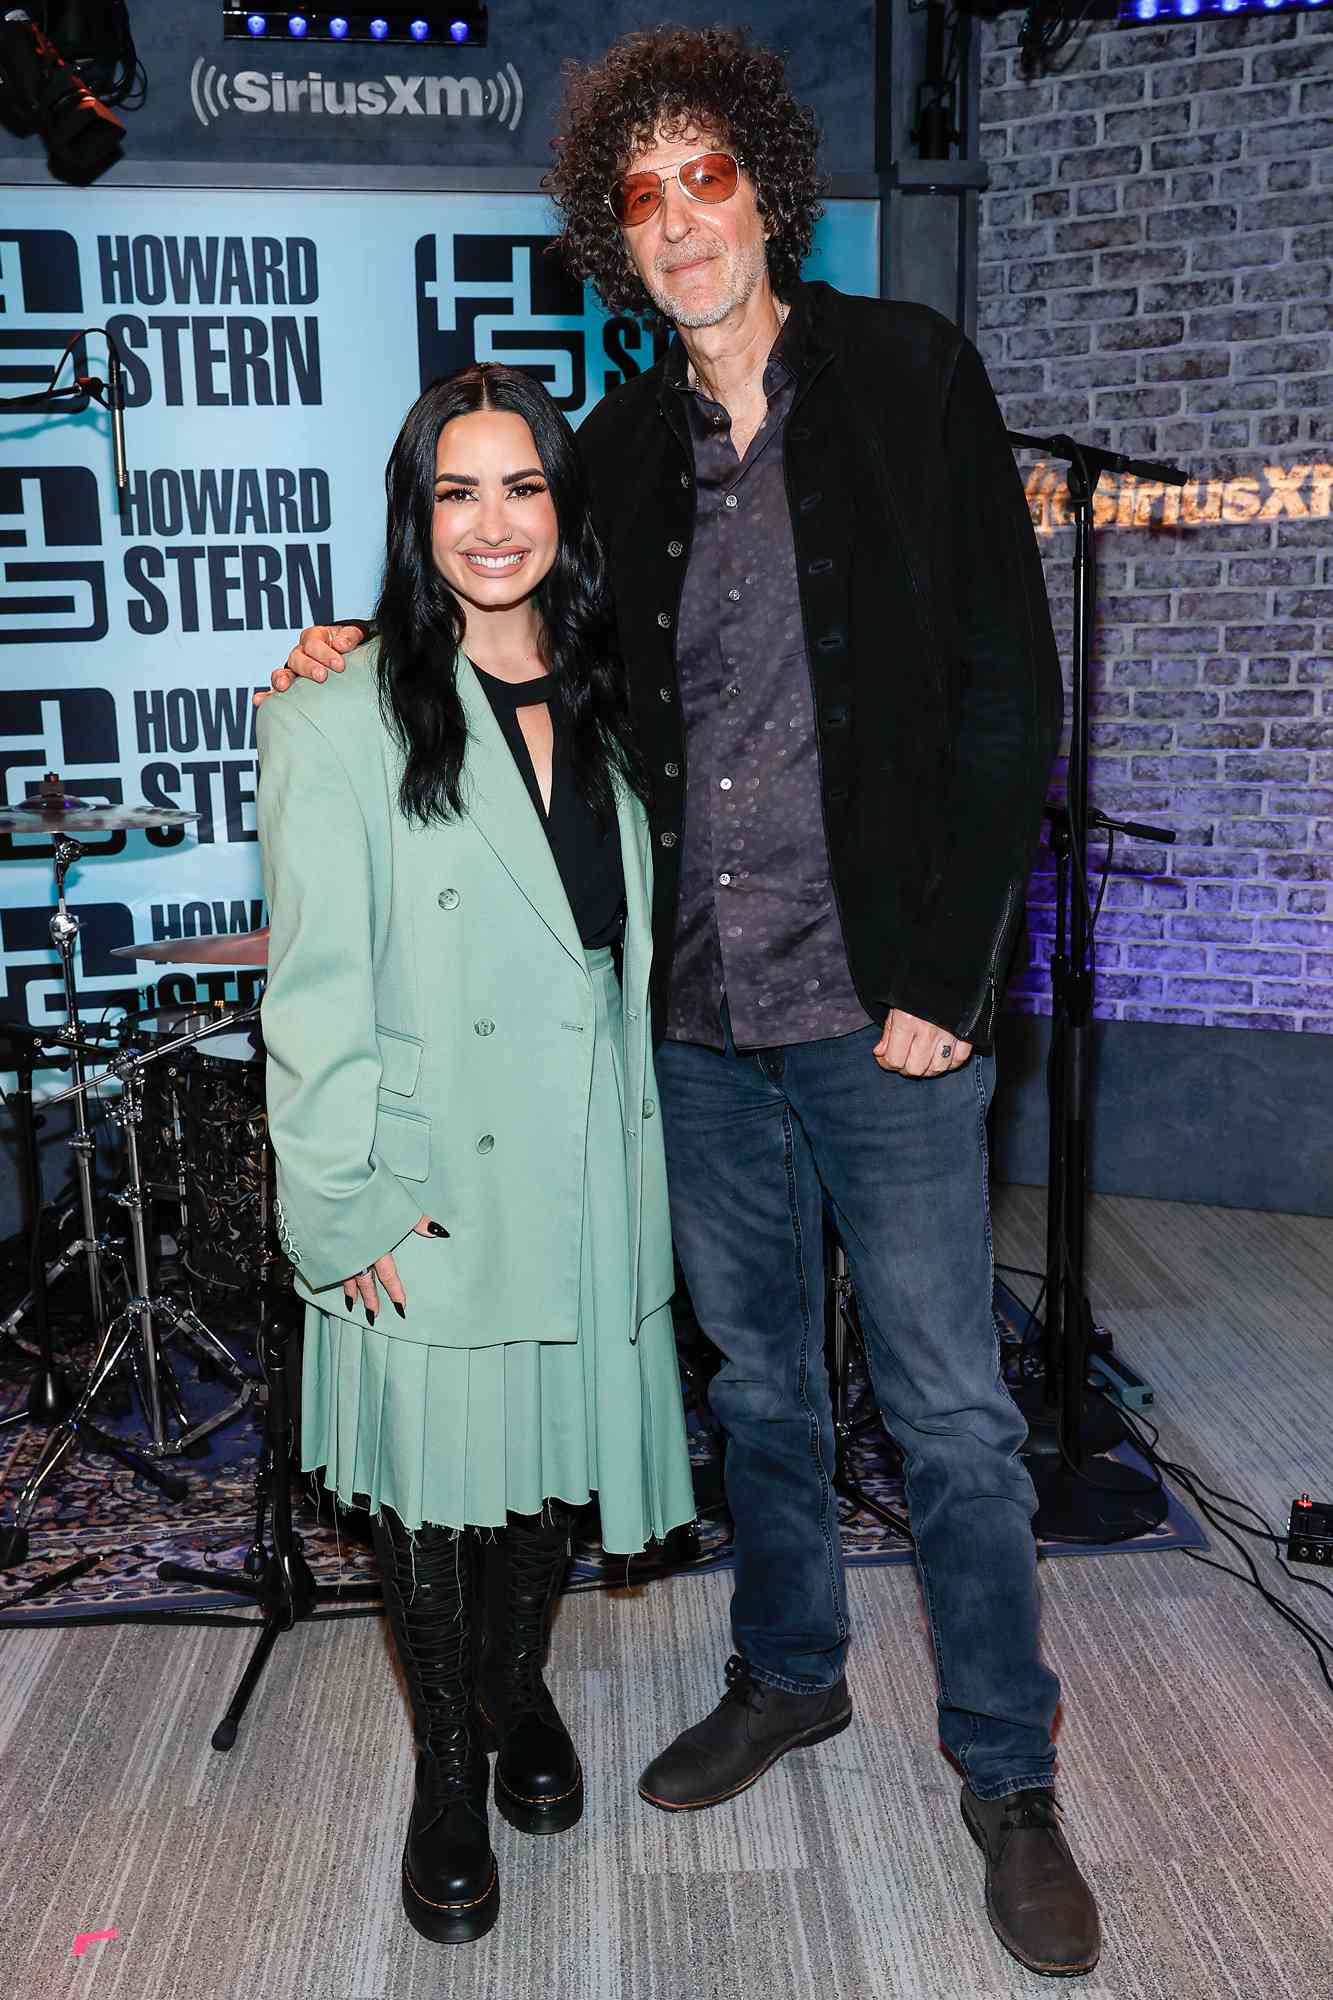 Howard Stern and Demi Lovato pose for a picture at SiriusXM's The Howard Stern Show at SiriusXM Studios on September 11, 2023